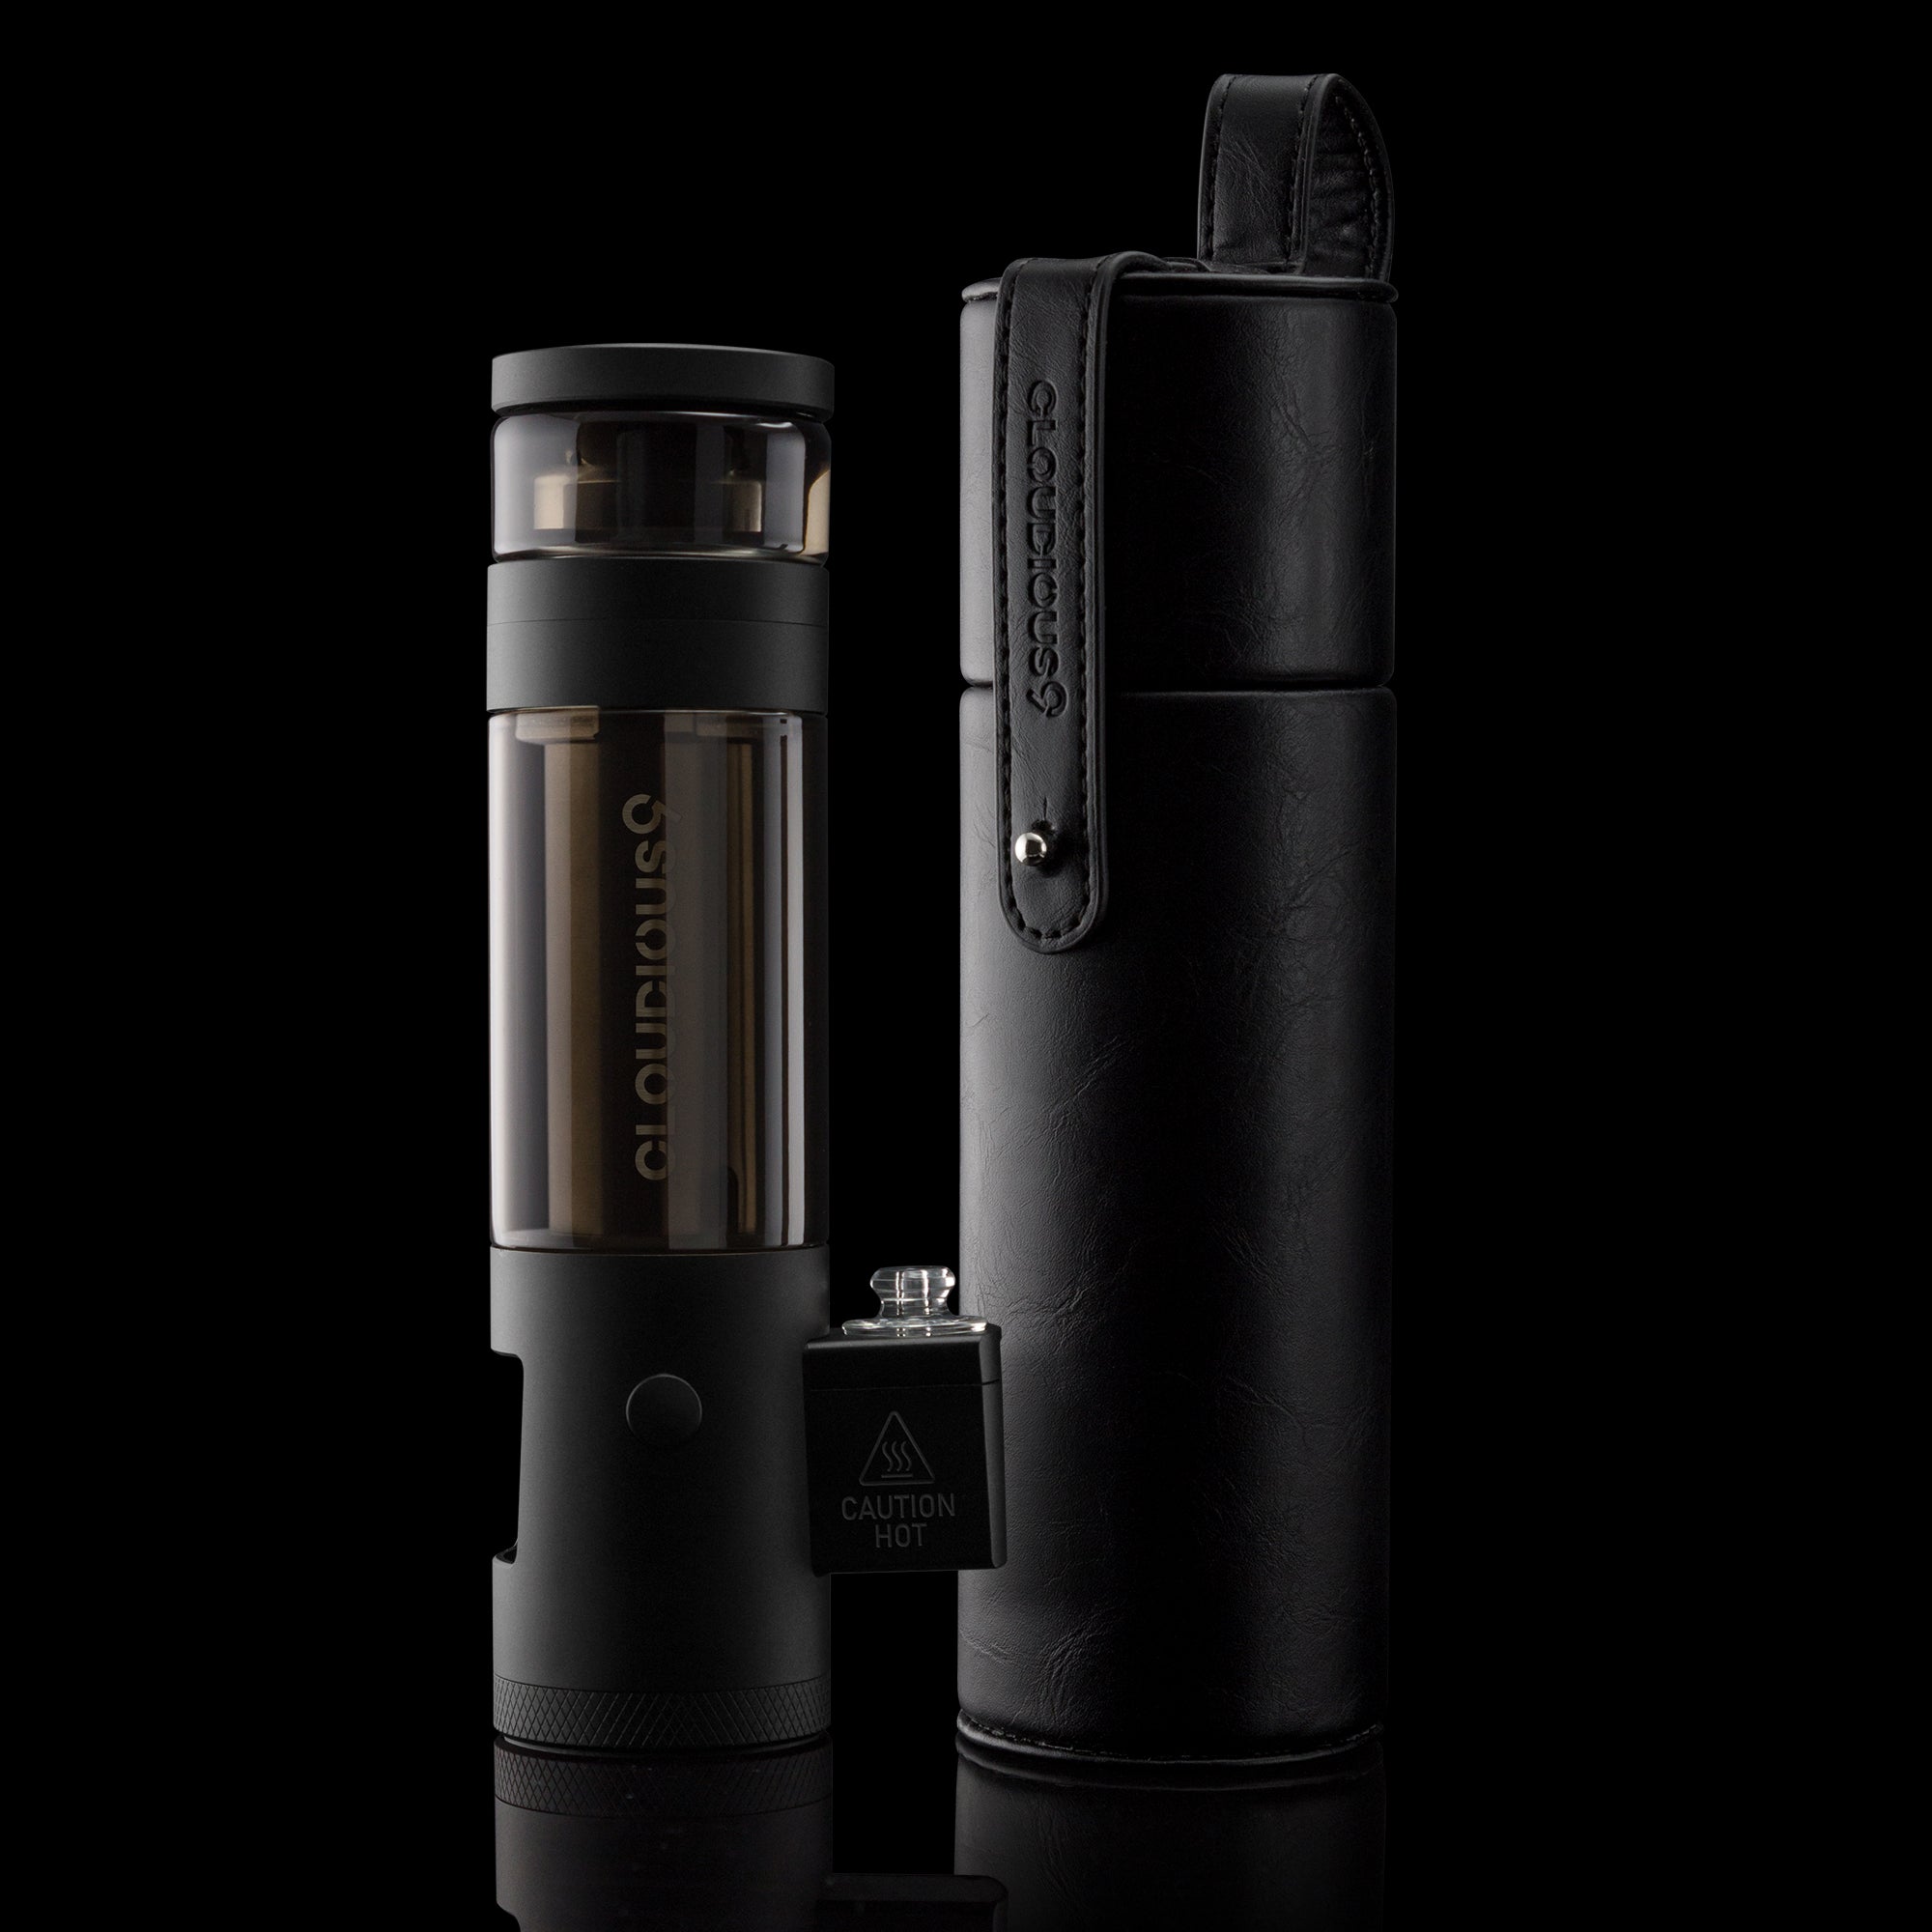 The Auto9 - Fully Automatic Grinder - Cloudious9